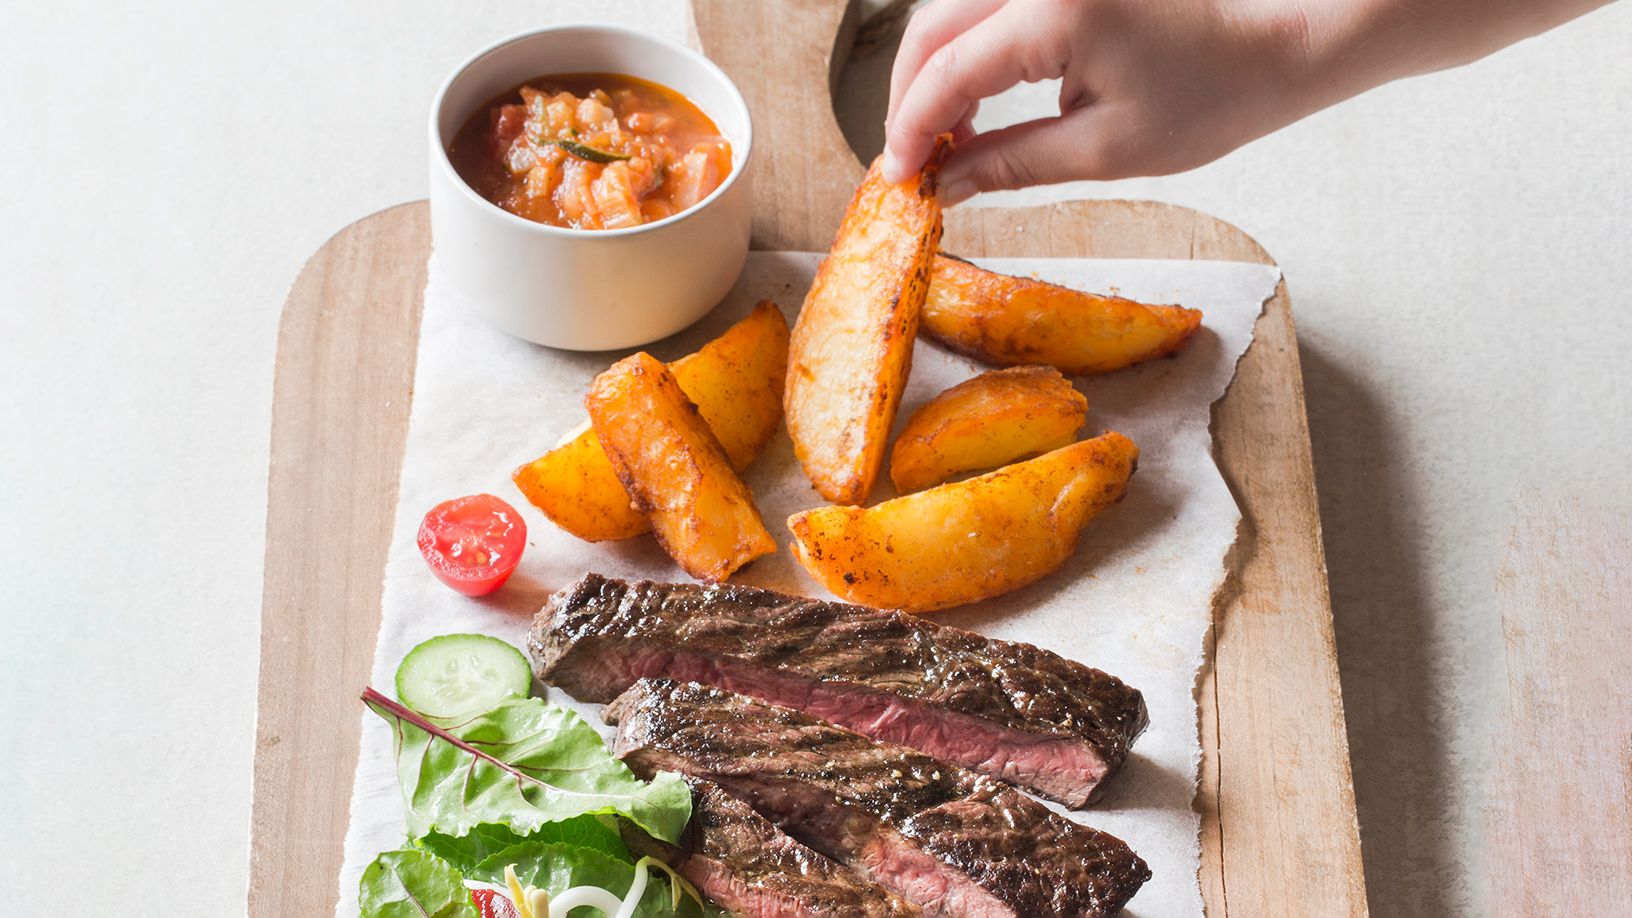 Steak and Wedges with Homemade Vegetable Sauce